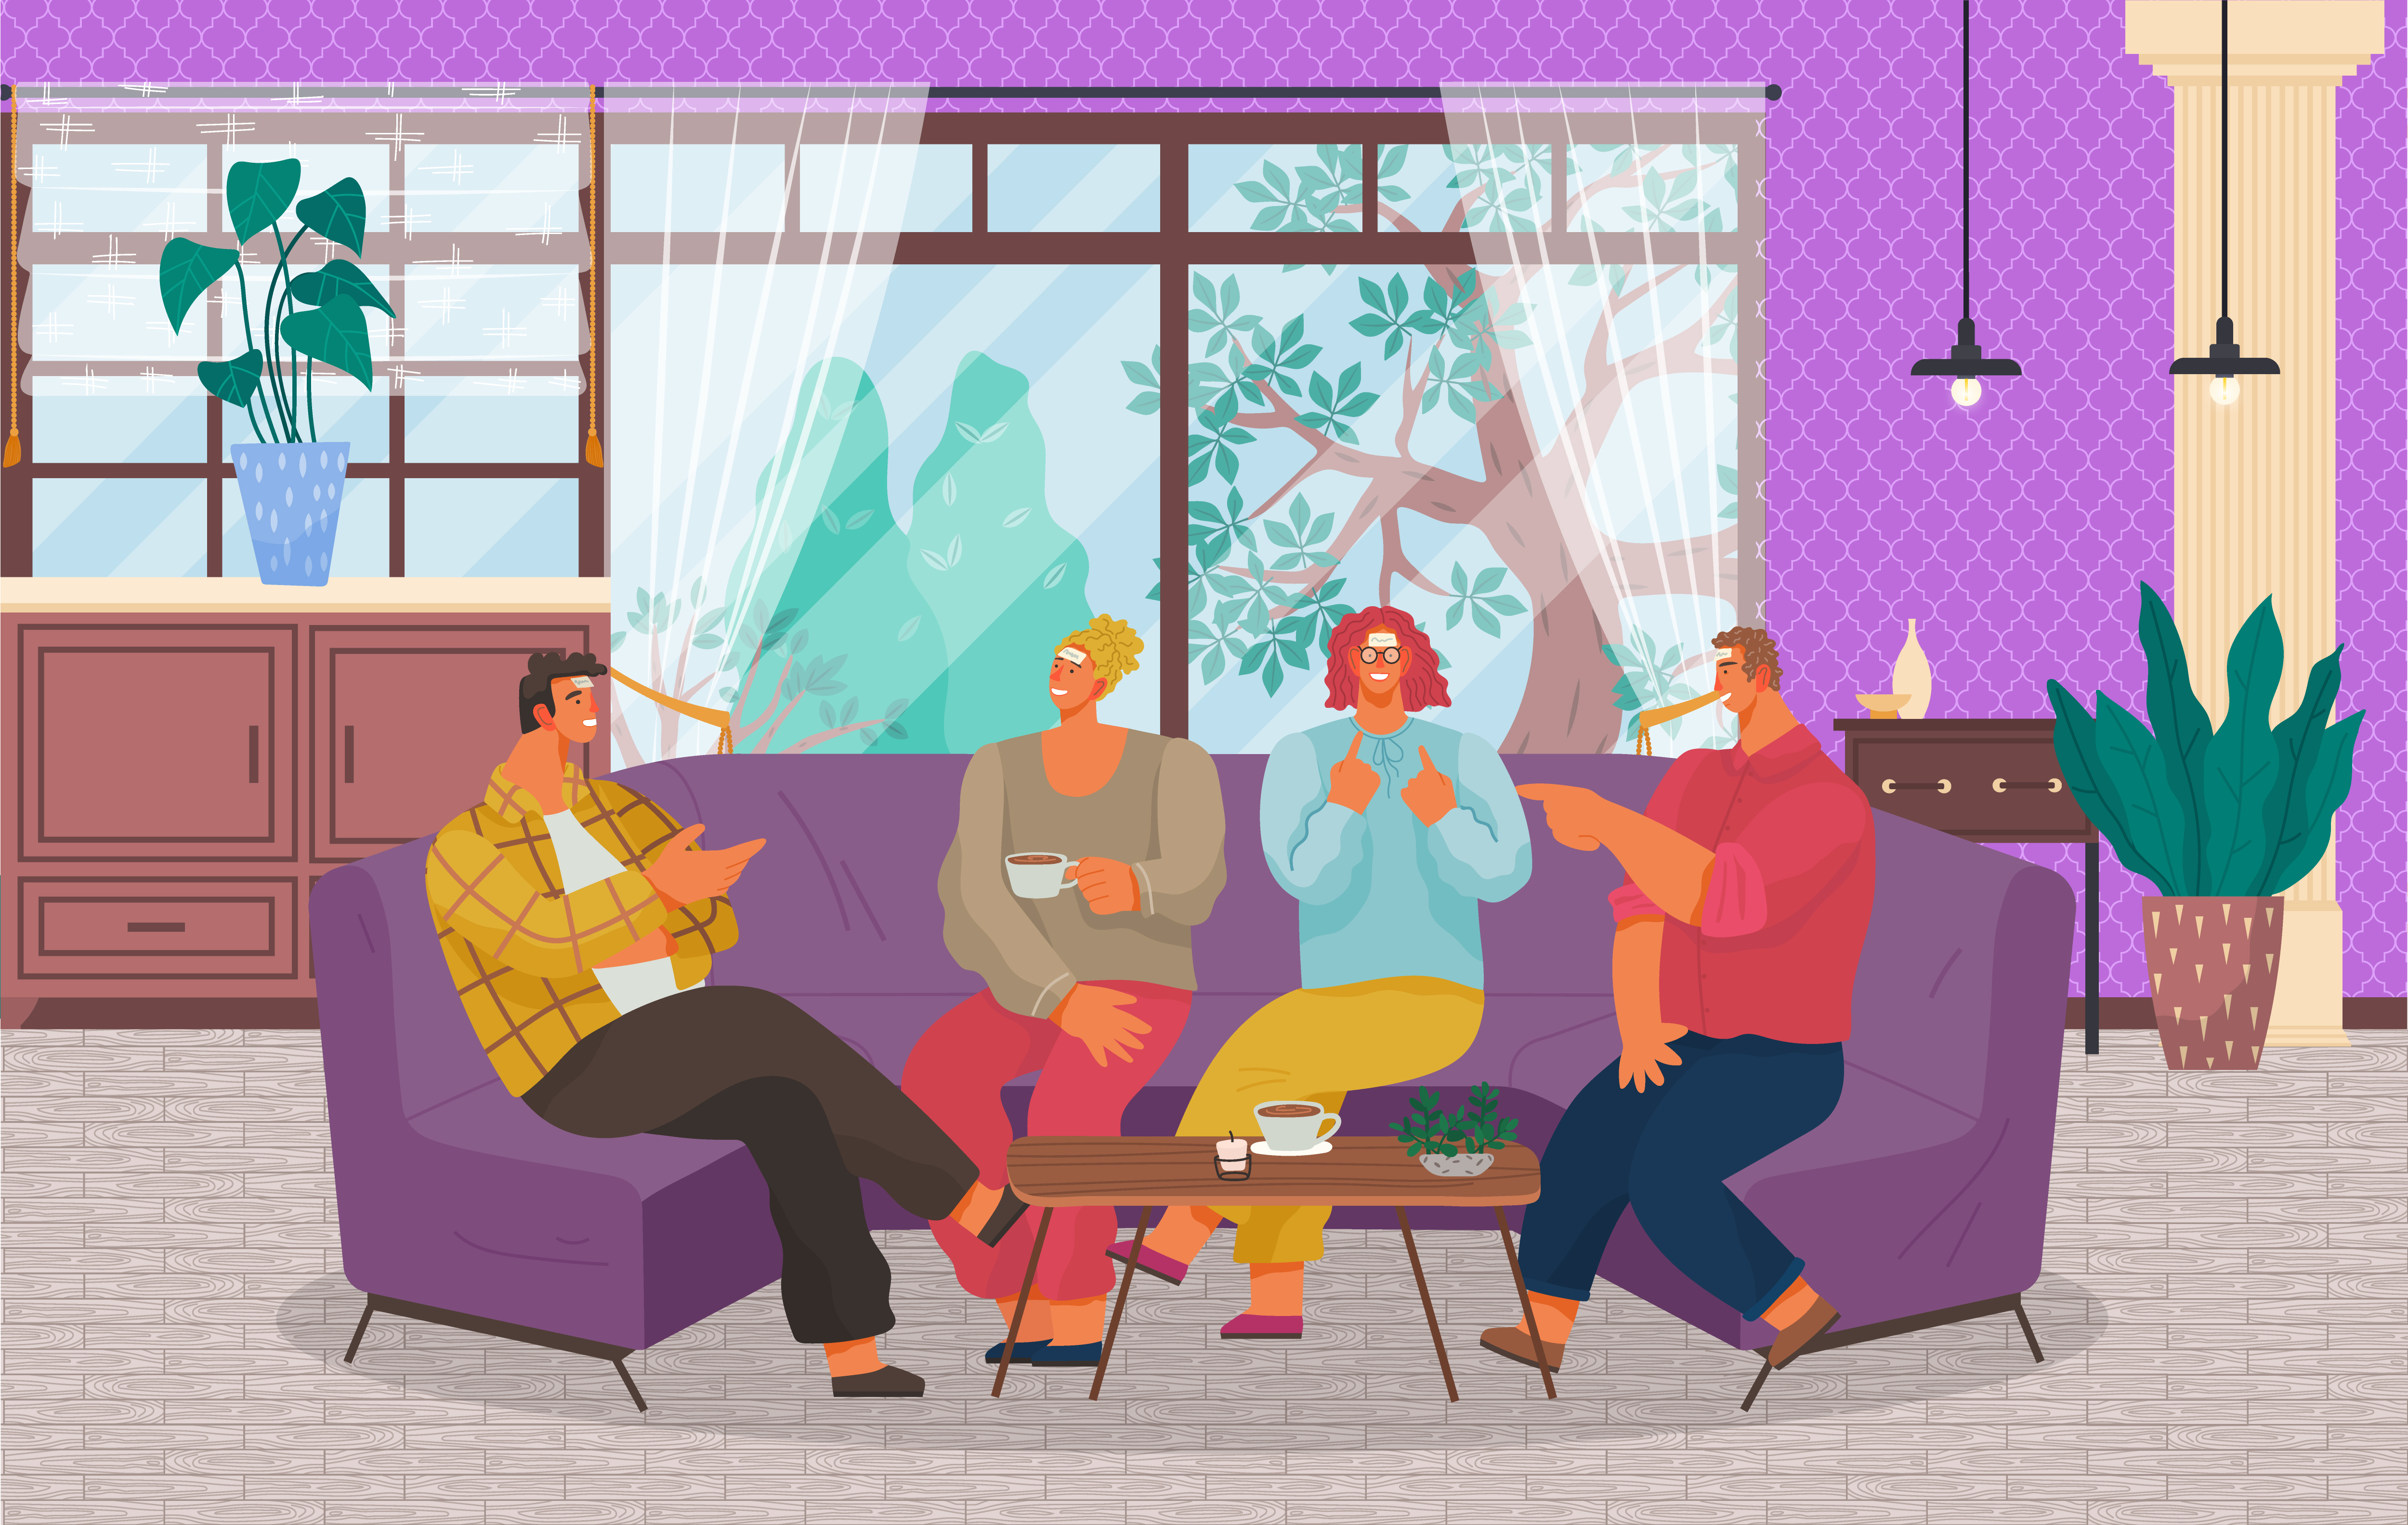 People spend leisure time playing games in living room. Men and women sit on violet sofa and have conversation. Meeting with friends at home. Apartment interior with big window. Vector illustration. Friends Playing Games on Sofa at Home, Meeting